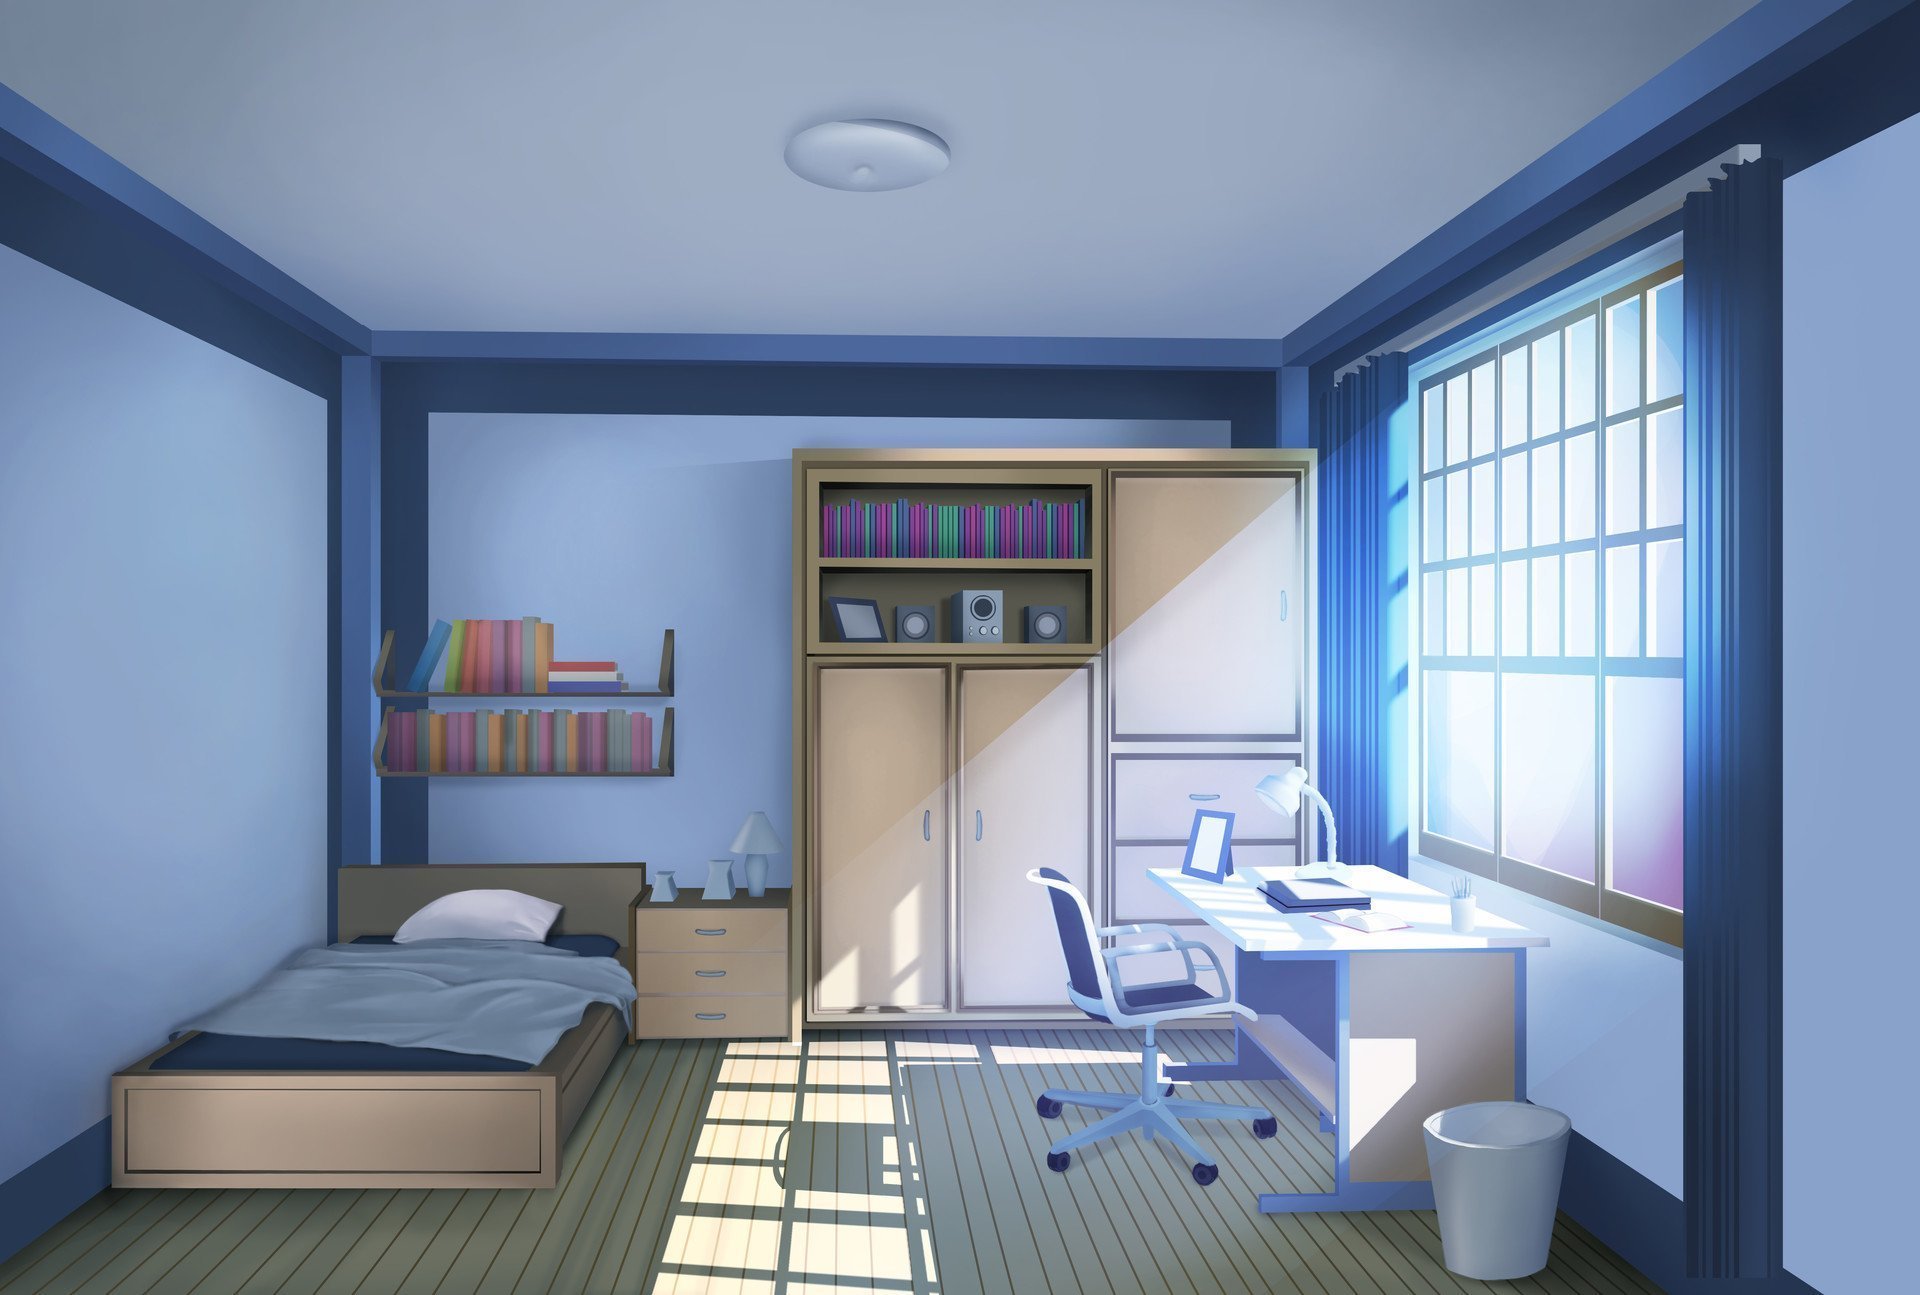 Download Cuddly Cozy: Adorable Anime Bedroom | Wallpapers.com